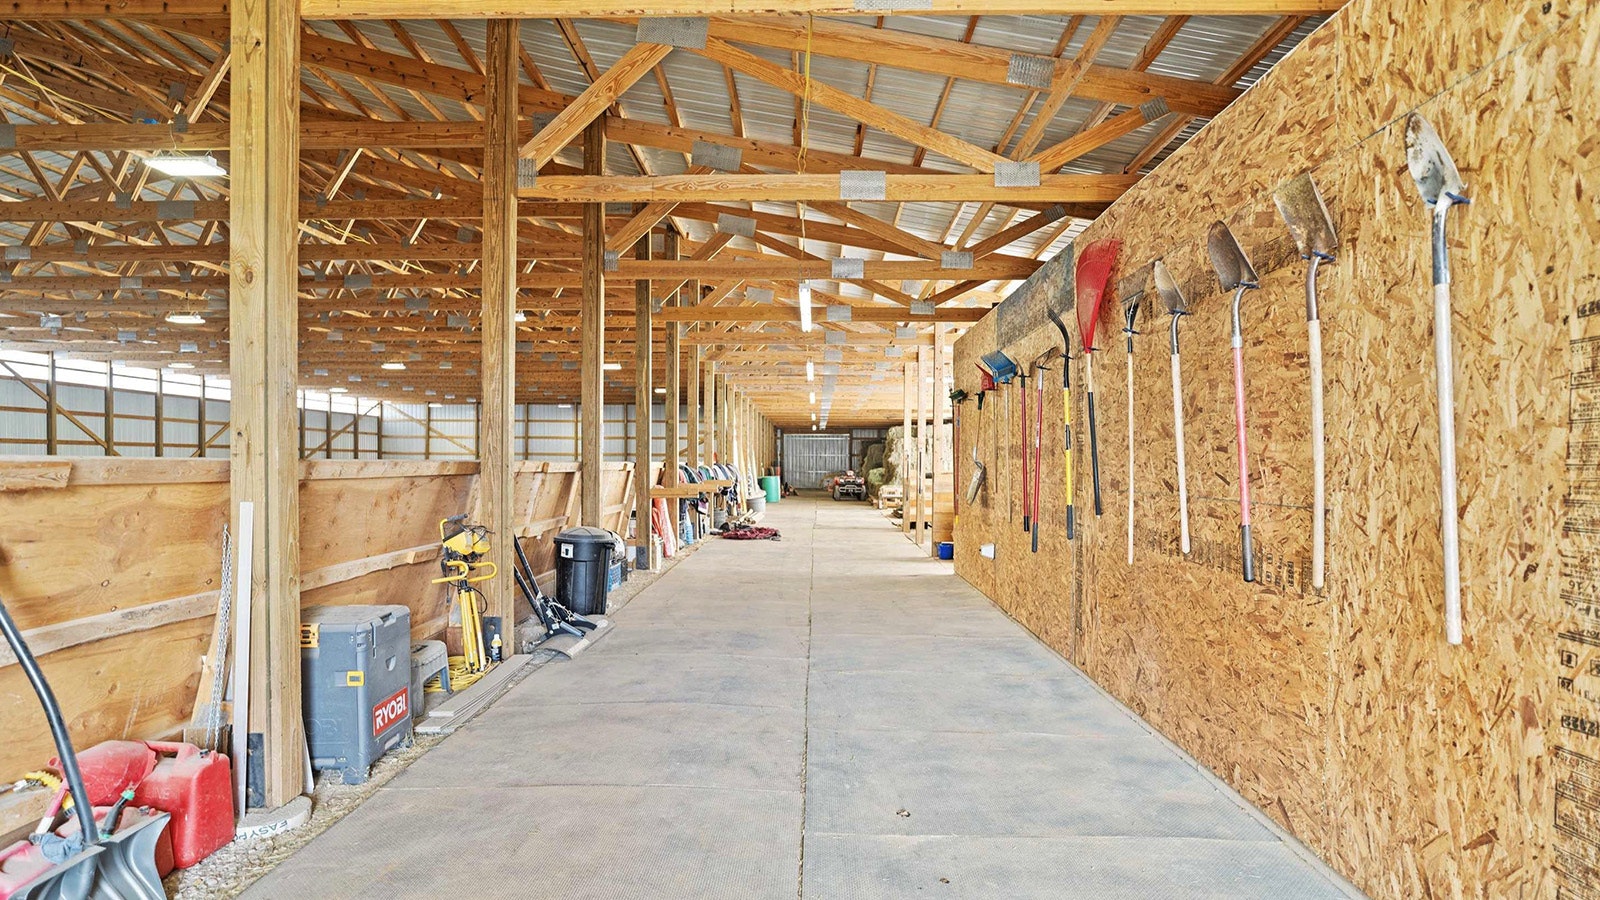 The real estate specialization niche of horse properties is something that's especially helpful in rural states like Wyoming, where homebuyers are looking for more than great living ammenities for themselves. They're also looking for their horses. This property also features a large hay barn, arena and other tack and on-site living areas to care for horses.